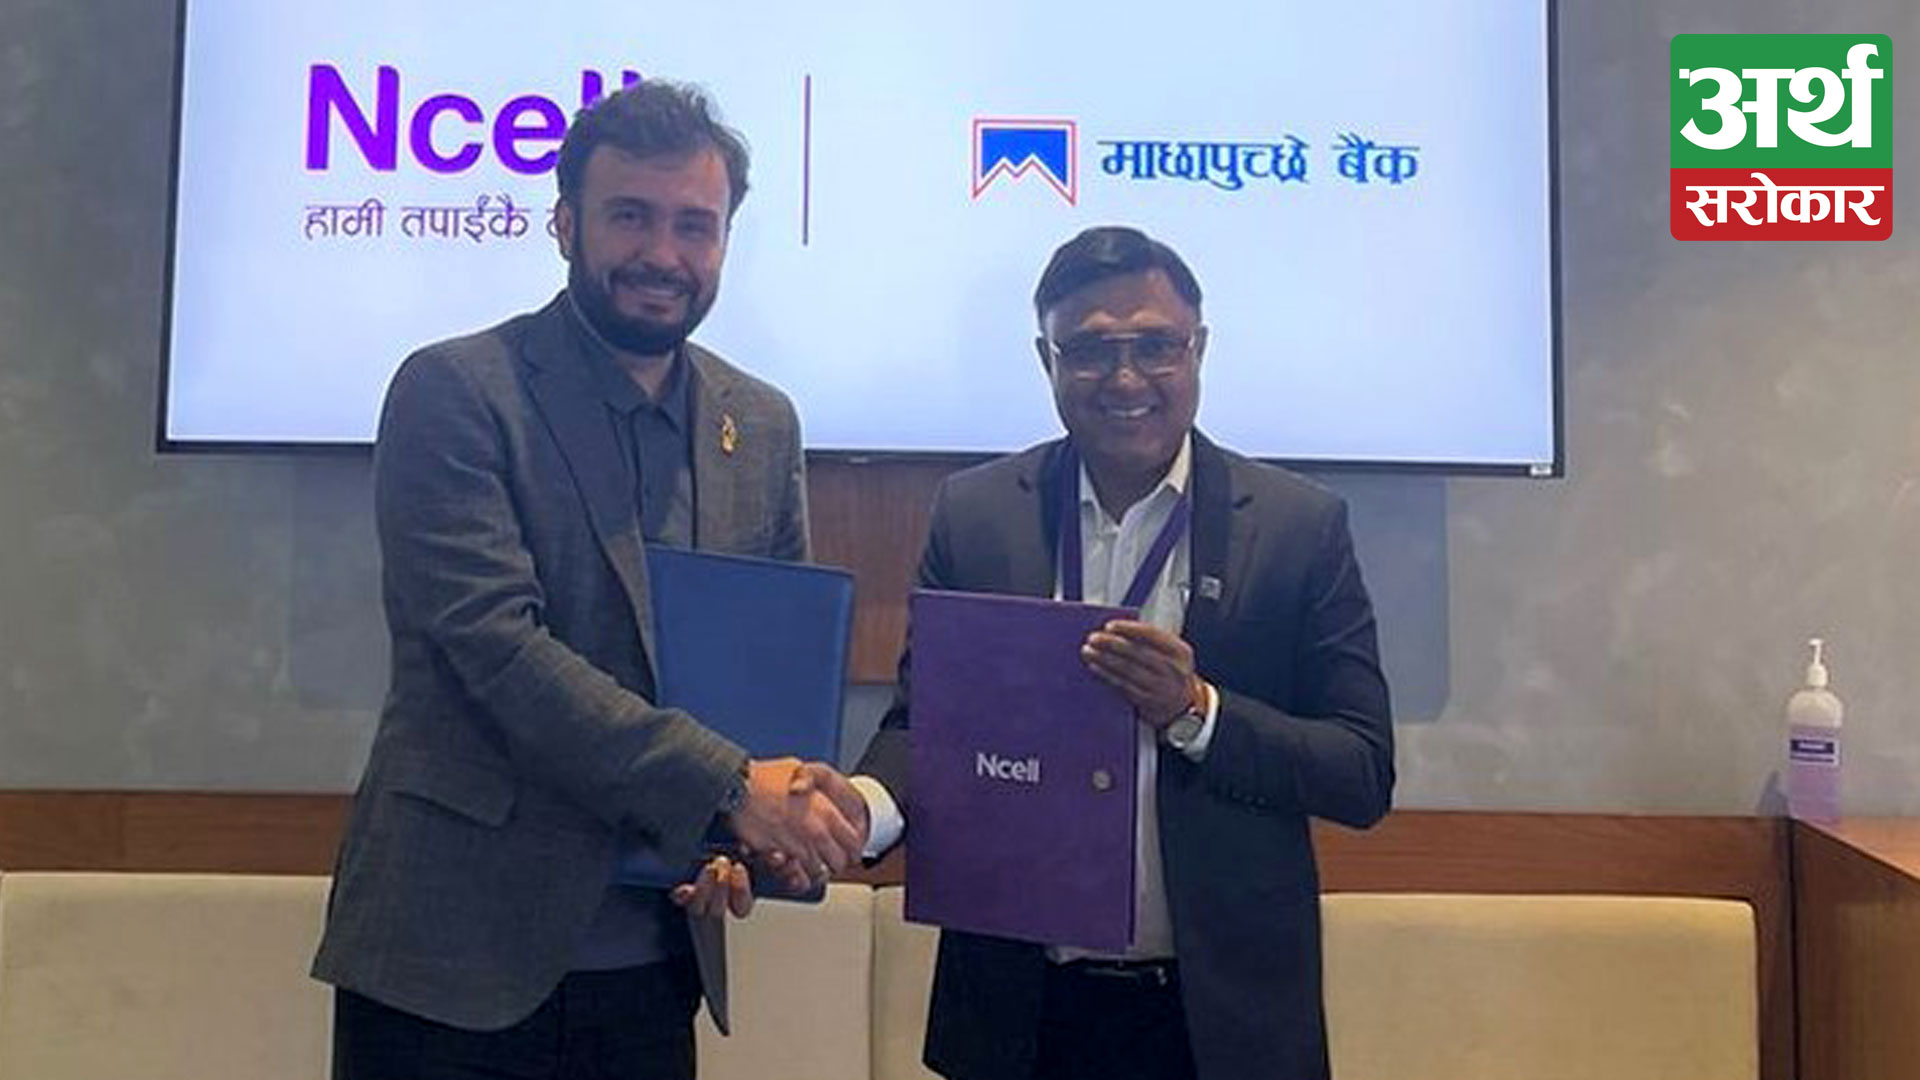 Ncell App gets payment enablement with the Machhapuchchhre Bank platform